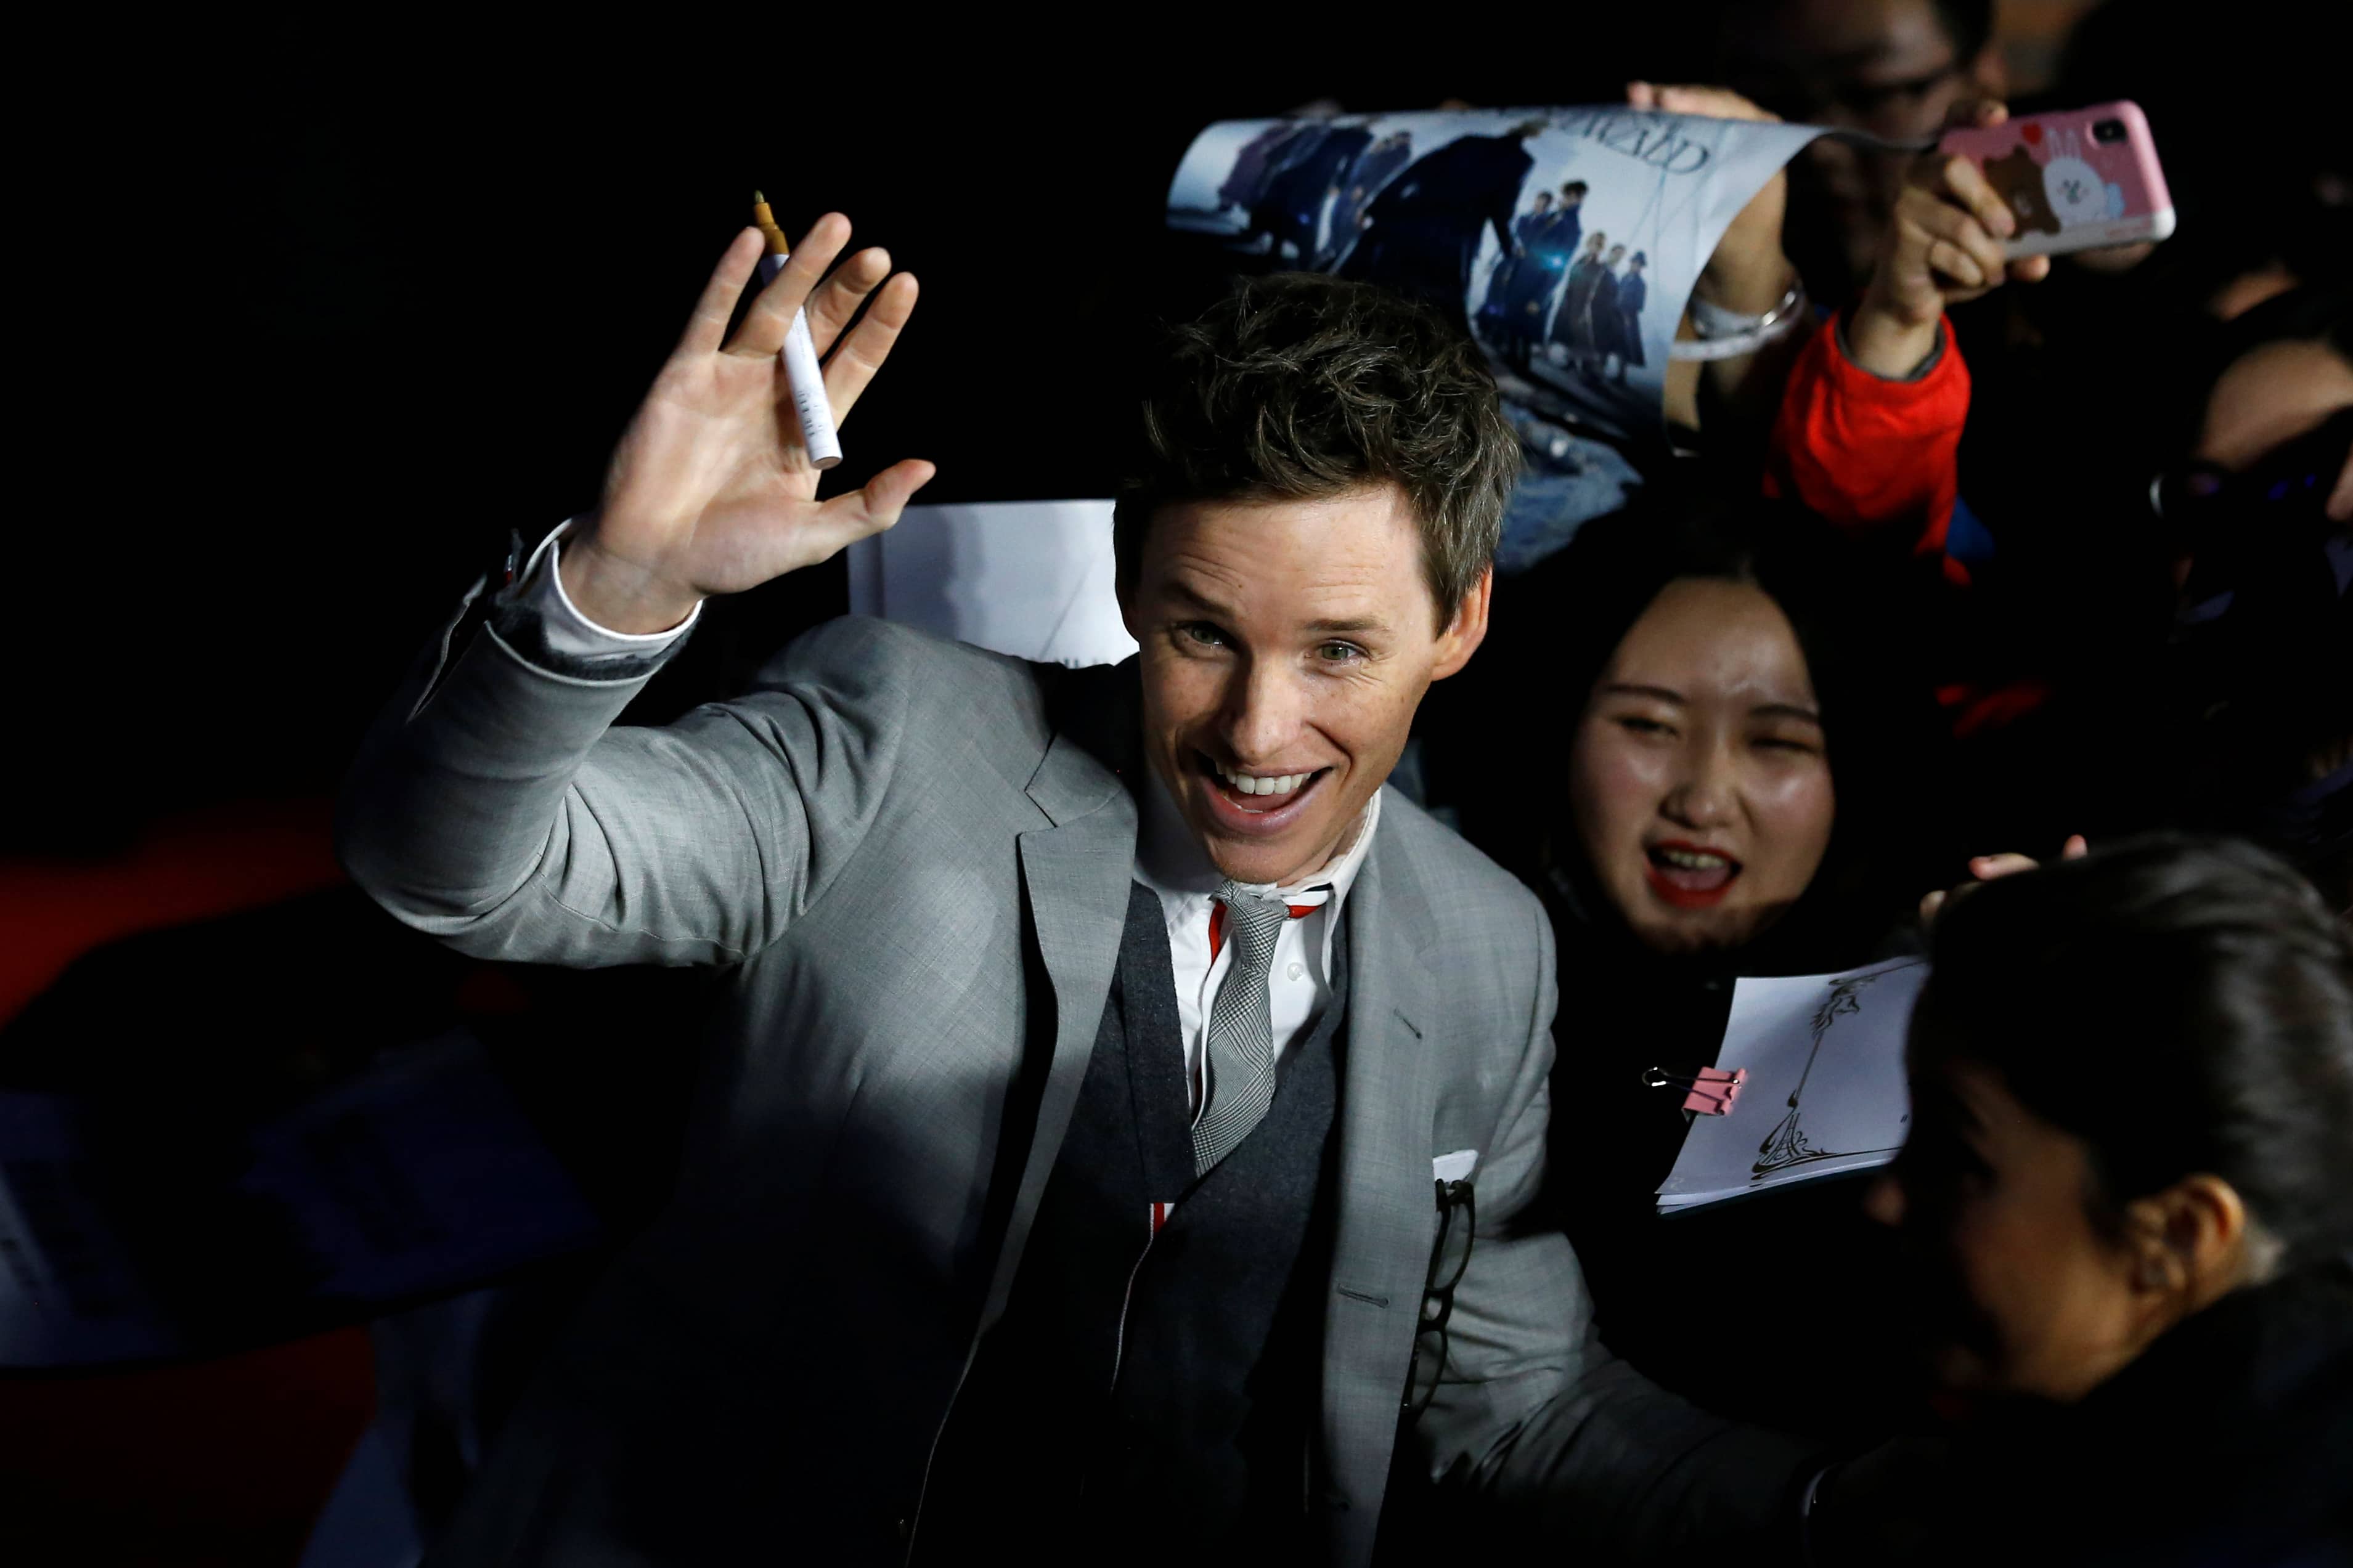 cast-member-eddie-redmayne-attends-a-promotion-for-the-movie-fantastic-beasts-the-crimes-of-grindelwald-in-beijing